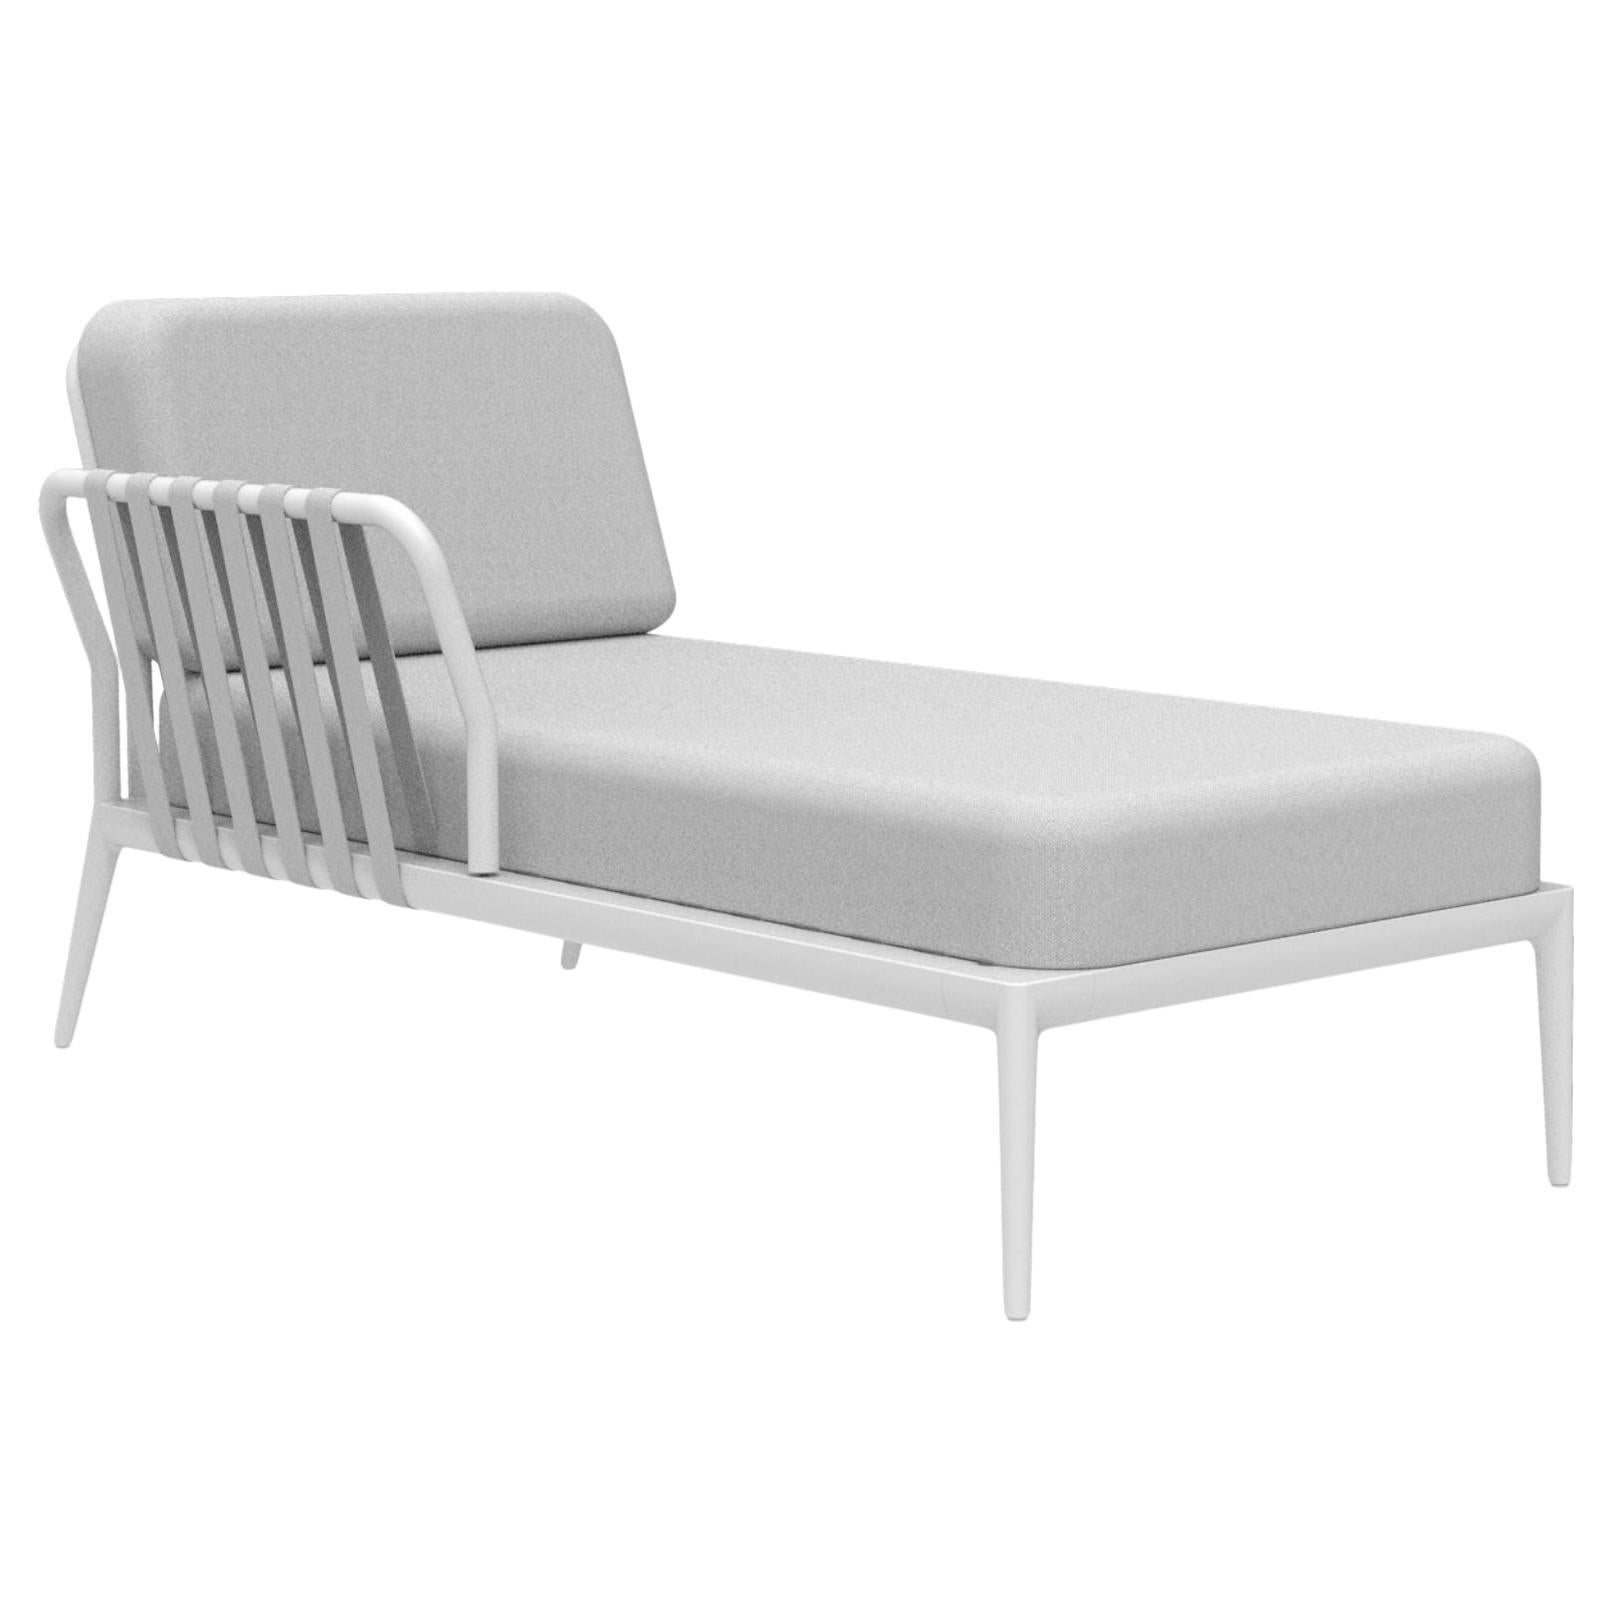 Ribbons White Right Chaise Longue by MOWEE For Sale